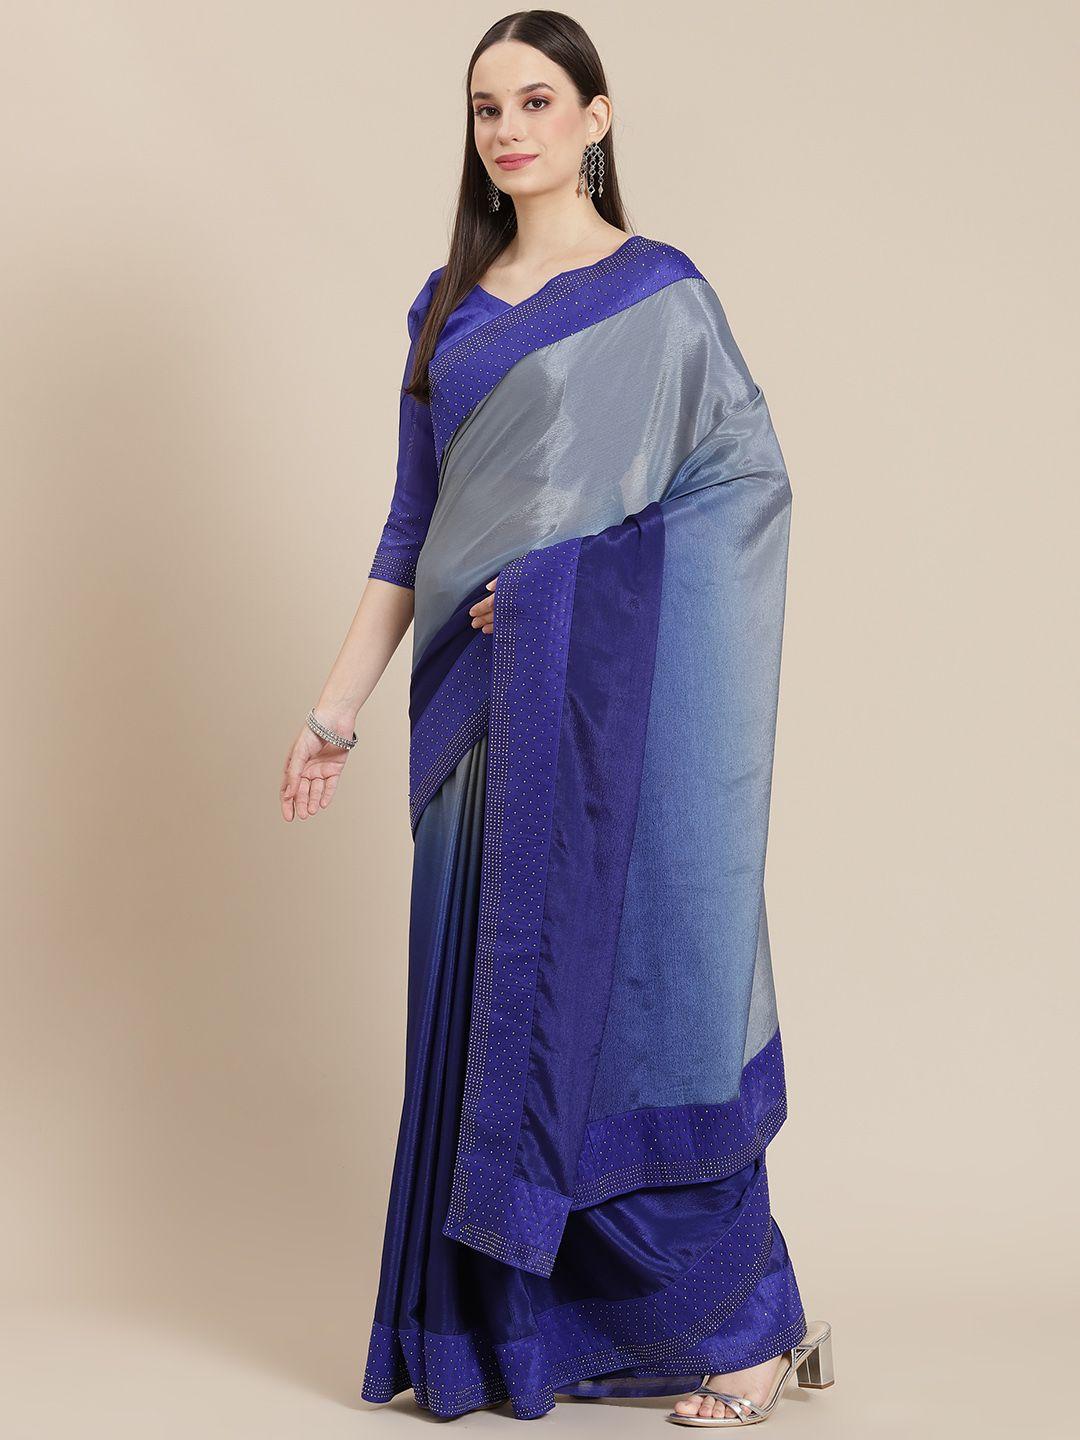 mitera-blue-&-grey-ombre-dyed-saree-with-embellished-border